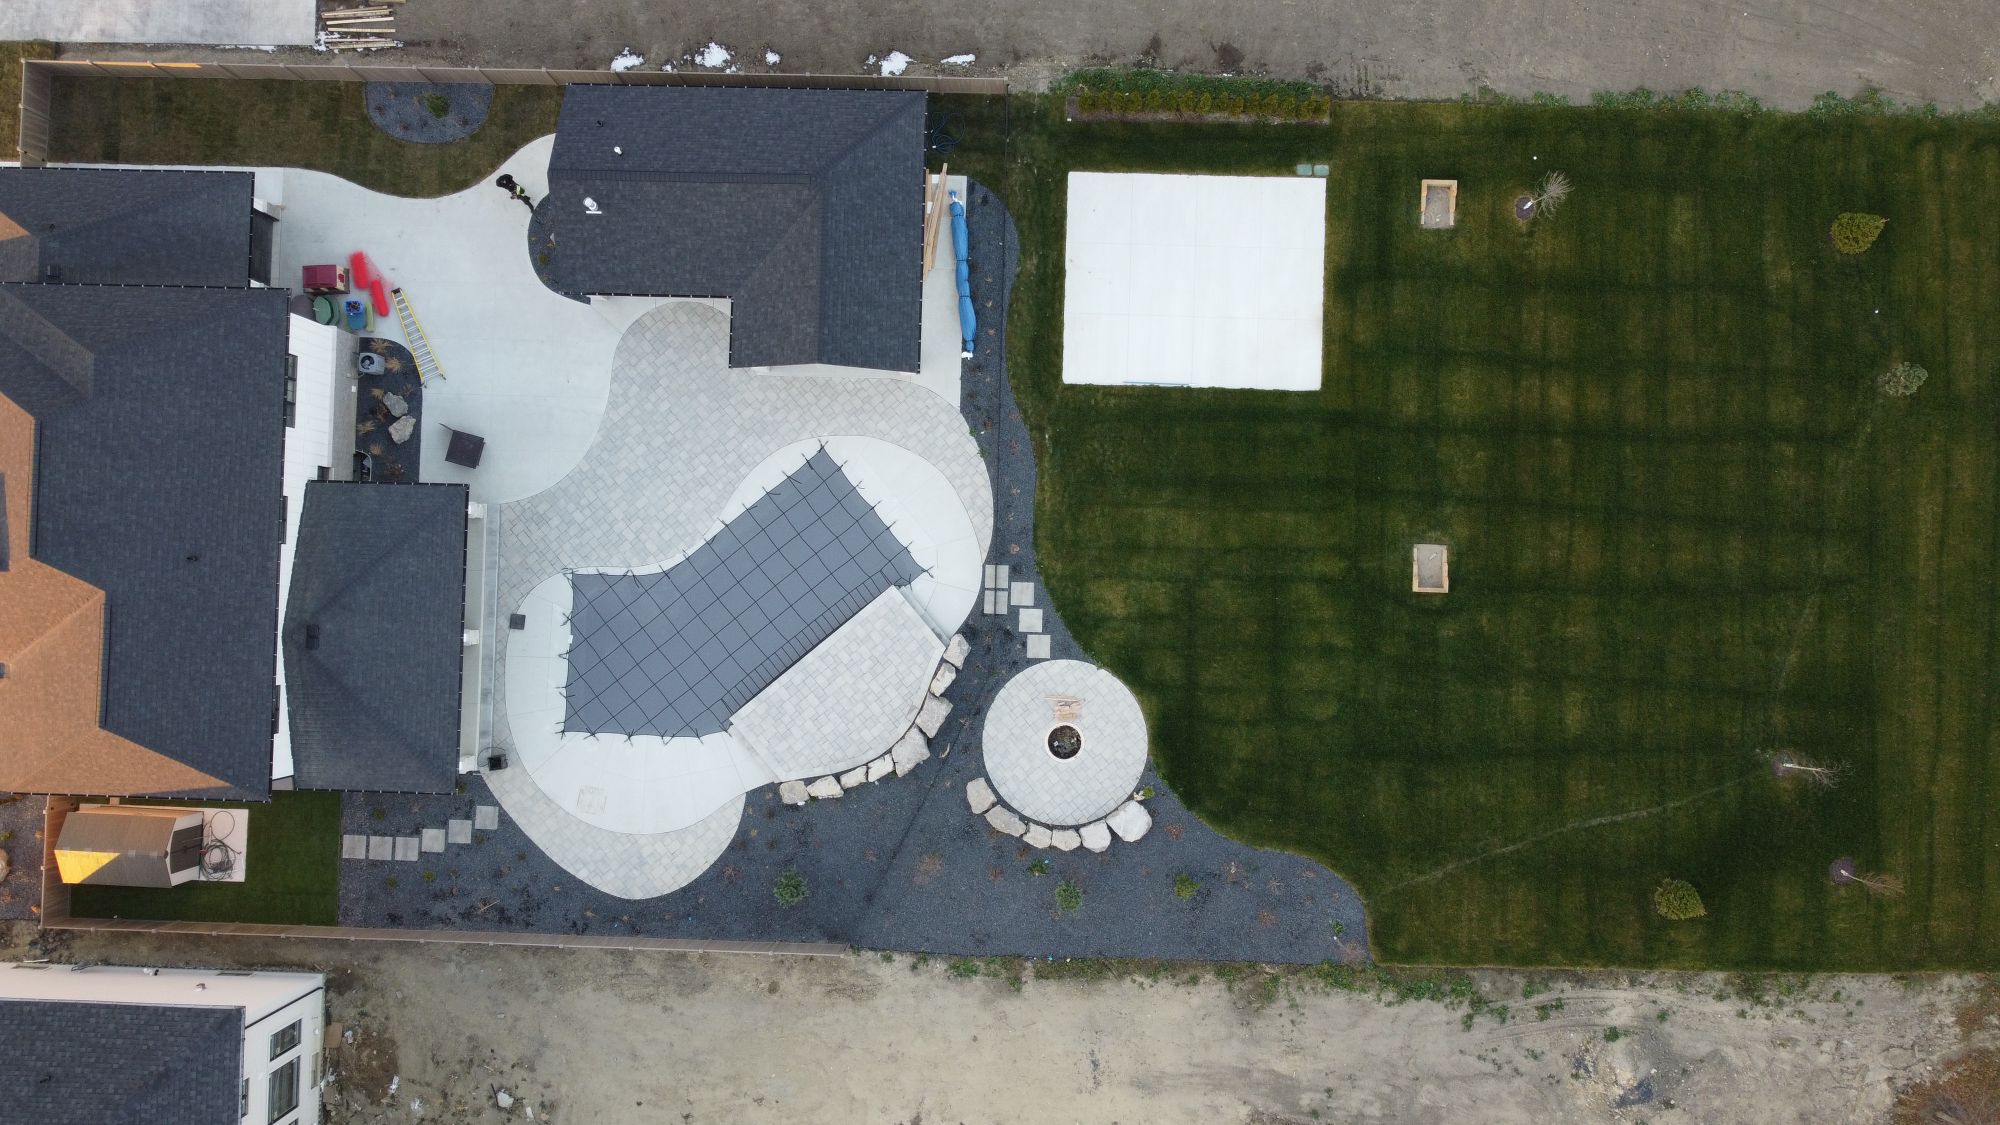 Dream backyard landscape, this Drone photo illustrates our commitment to extend your living space. Setting fences straight is what we do on a daily basis.